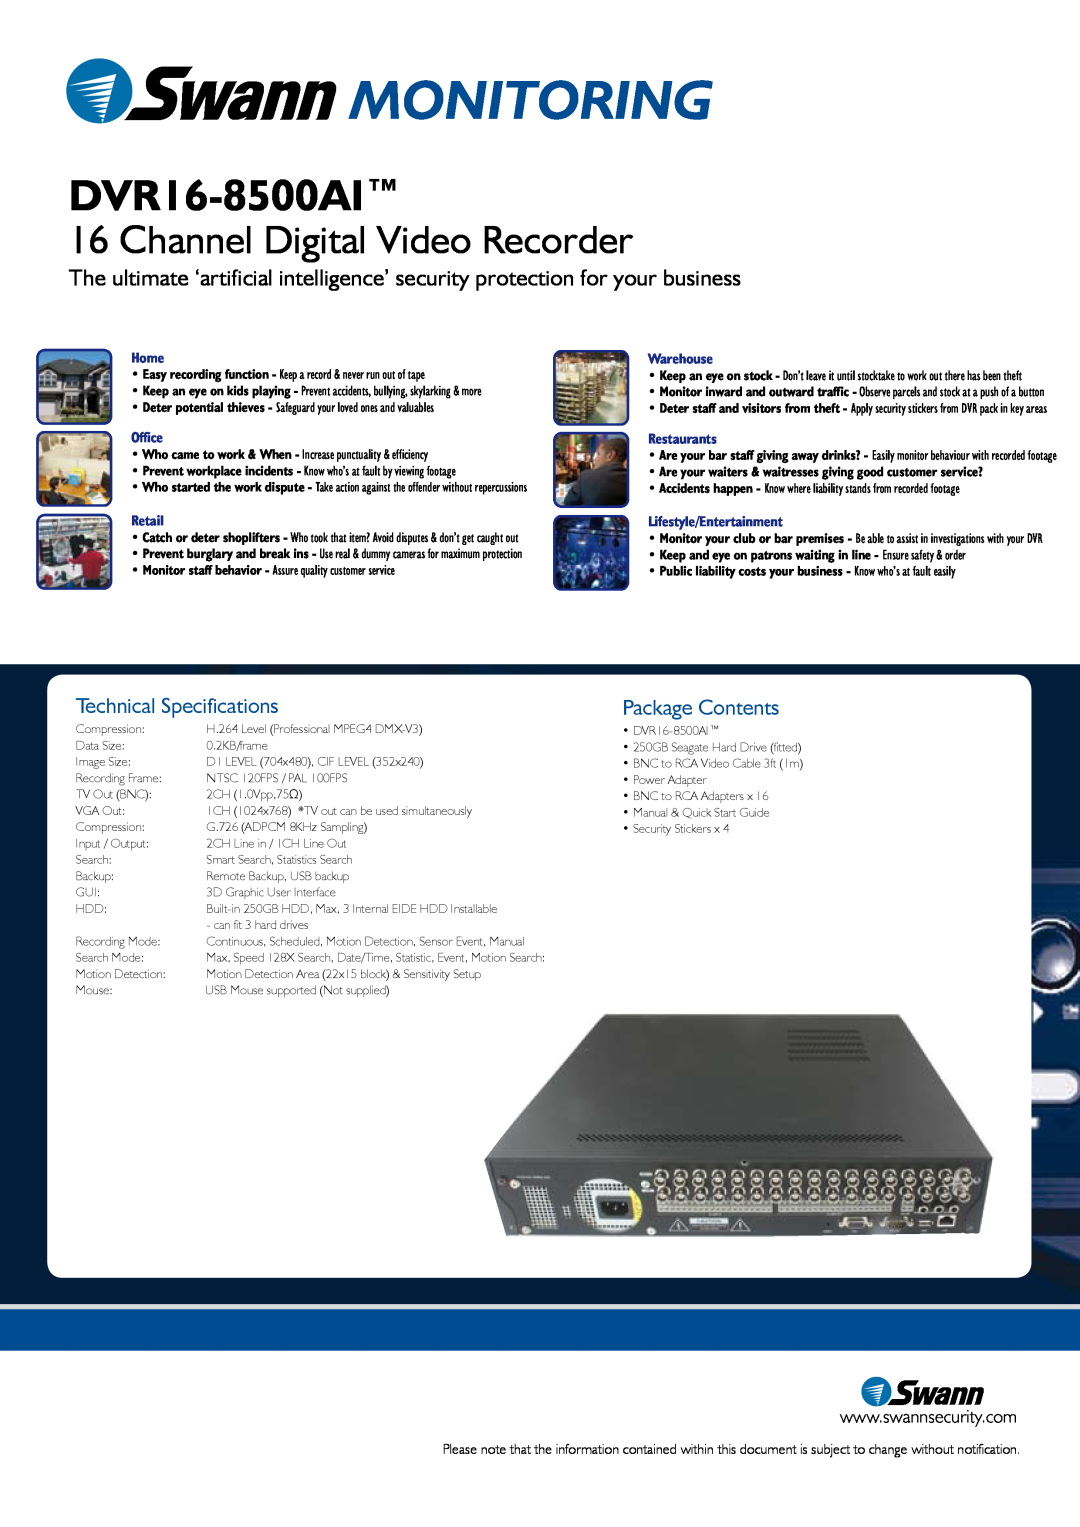 Swann SW243-X6G Monitoring, DVR16-8500AI, Channel Digital Video Recorder, Technical Specifications, Package Contents, Home 